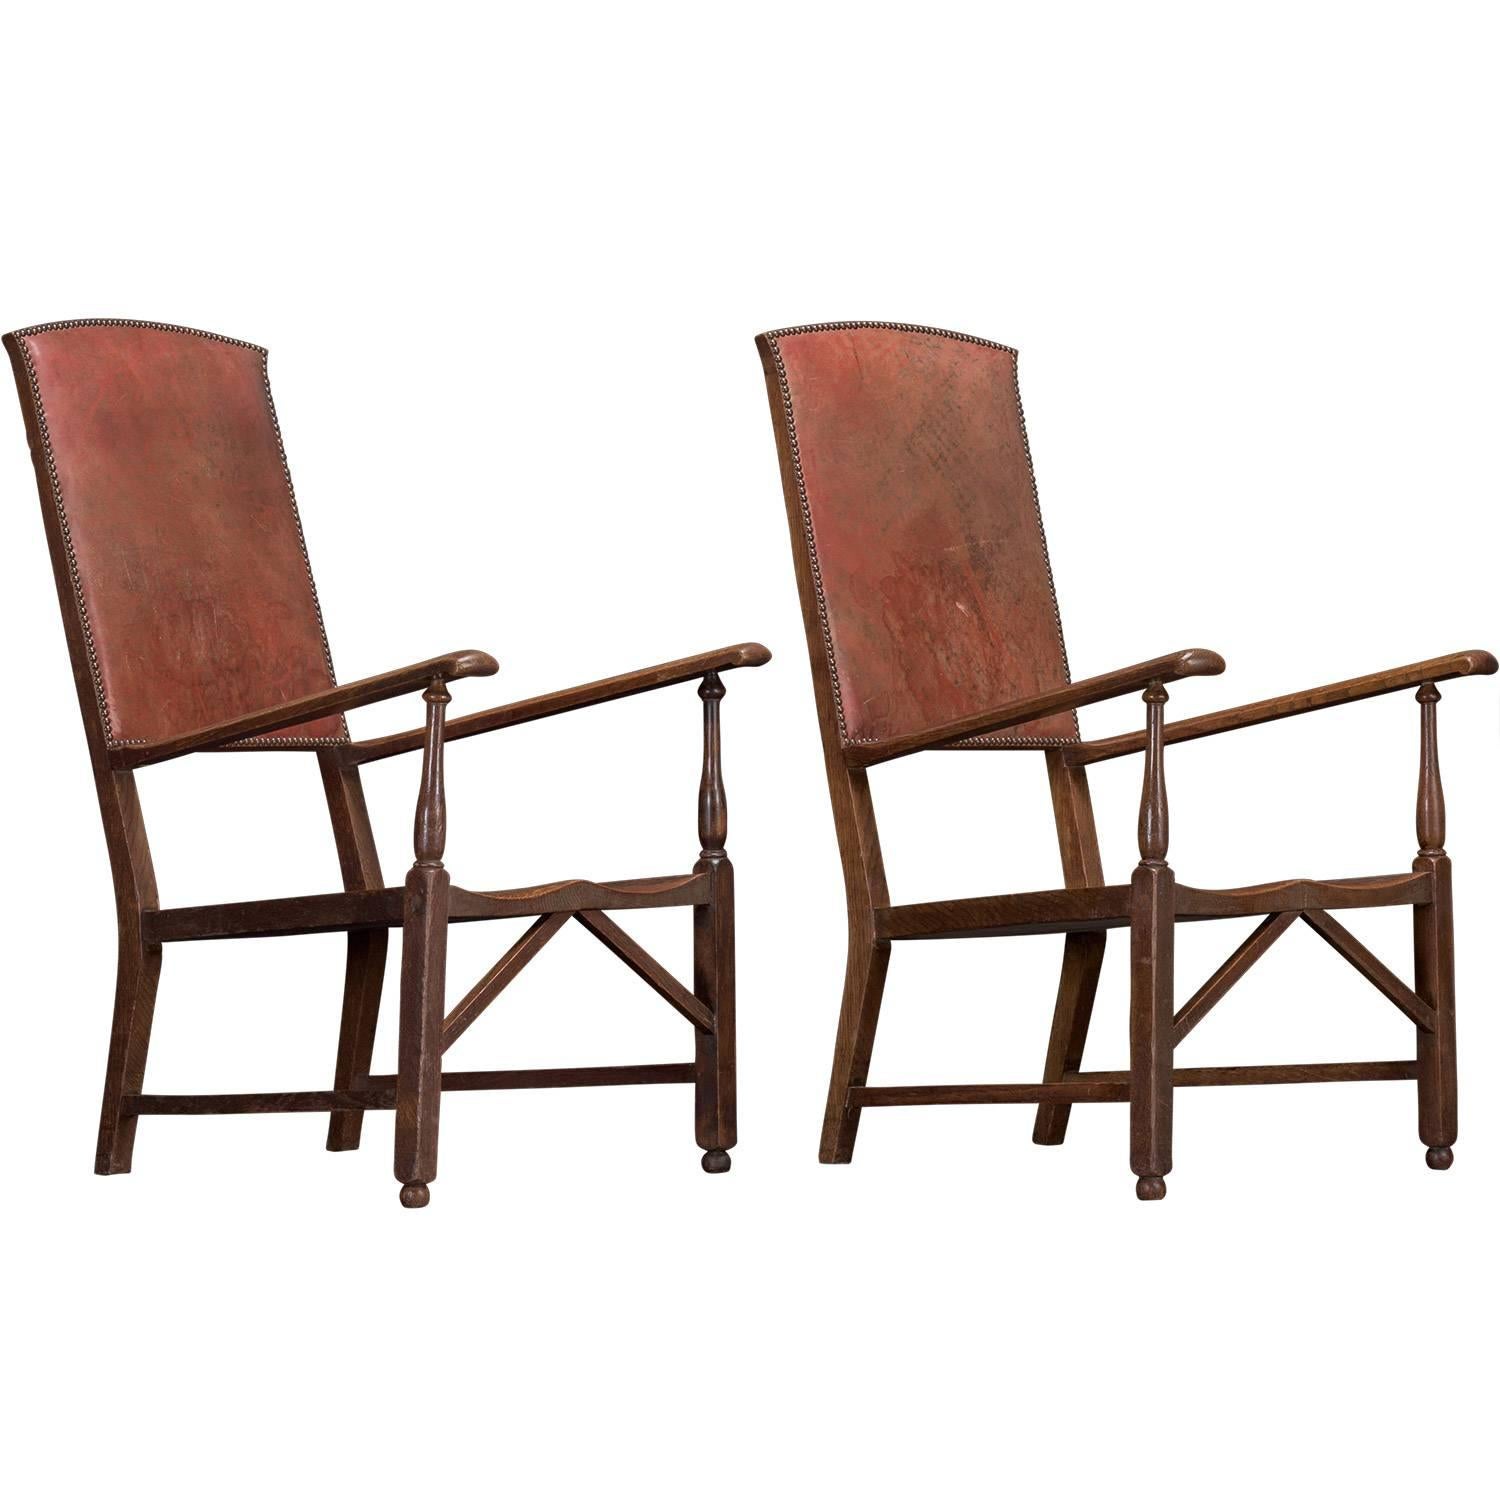 Pair of Oak and Leather Armchairs, circa 1900